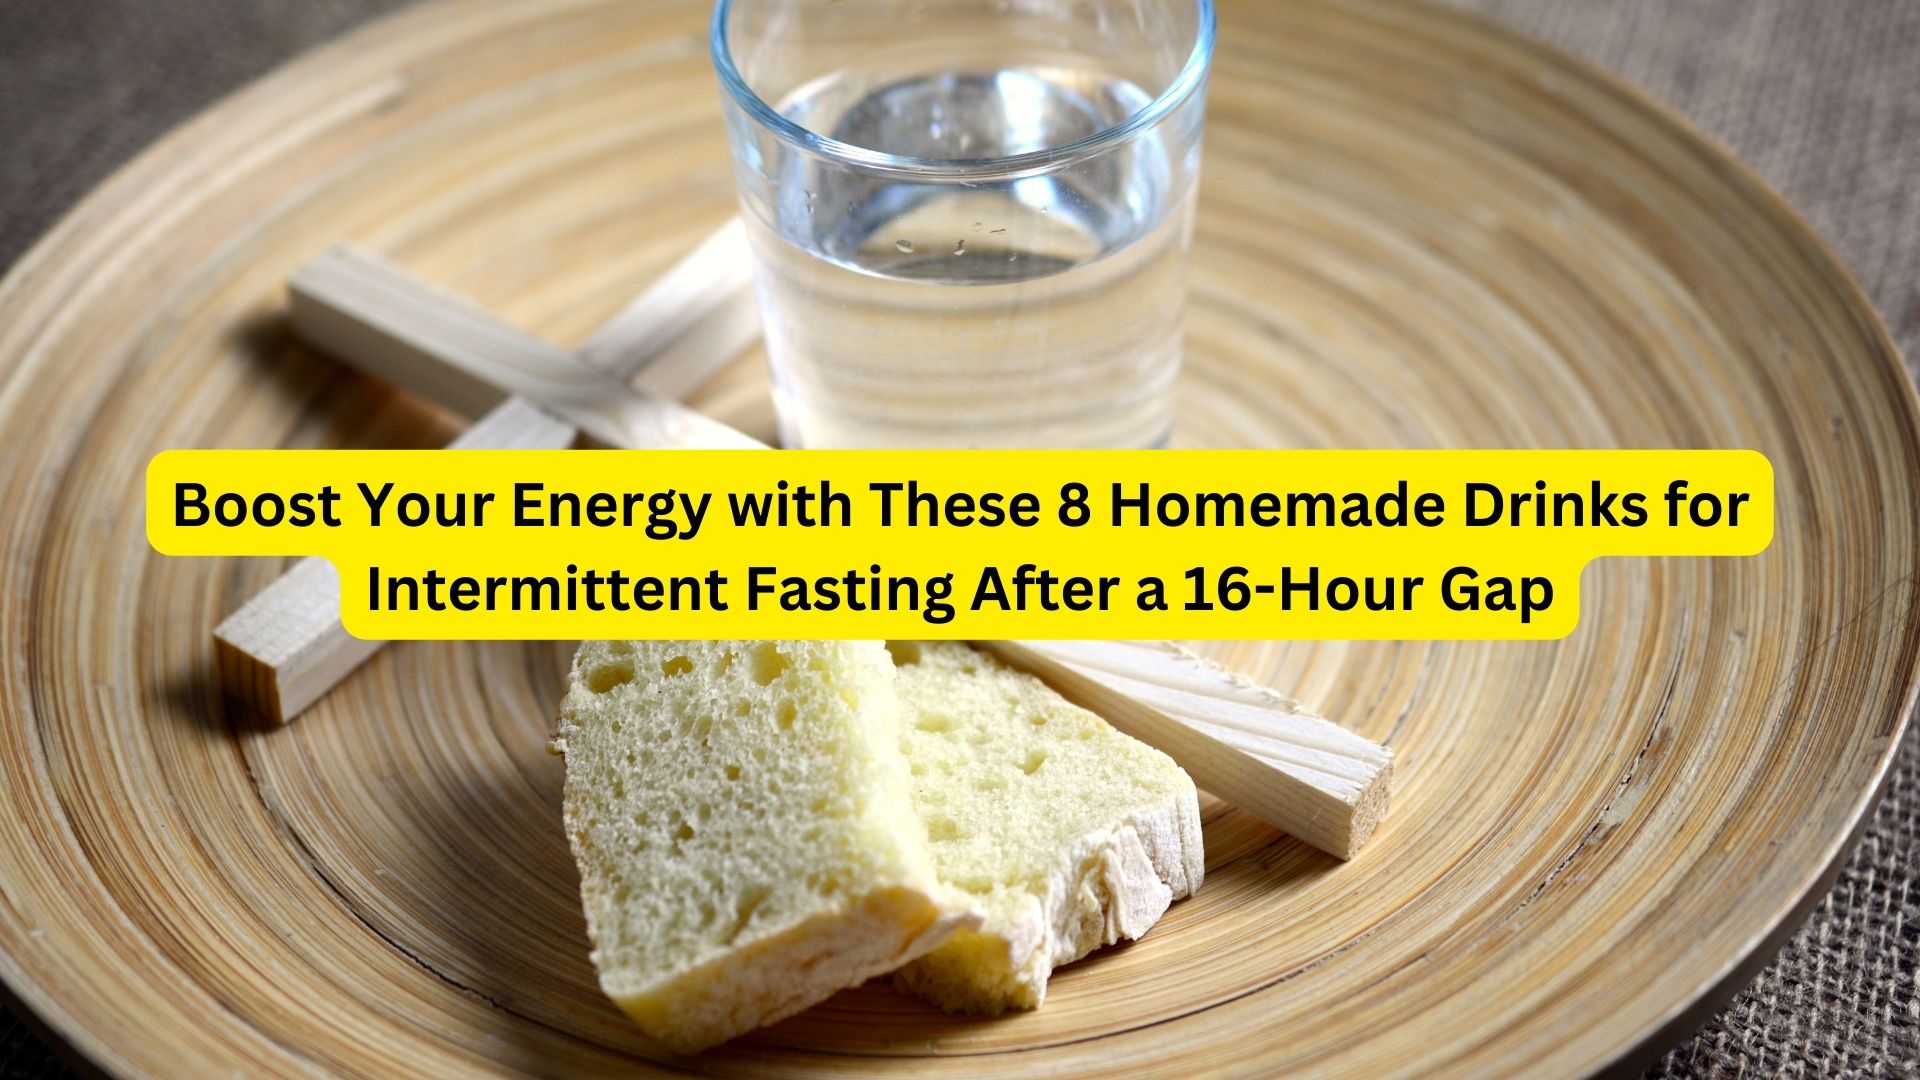 Boost Your Energy with These 8 Homemade Drinks for Intermittent Fasting After a 16-Hour Gap